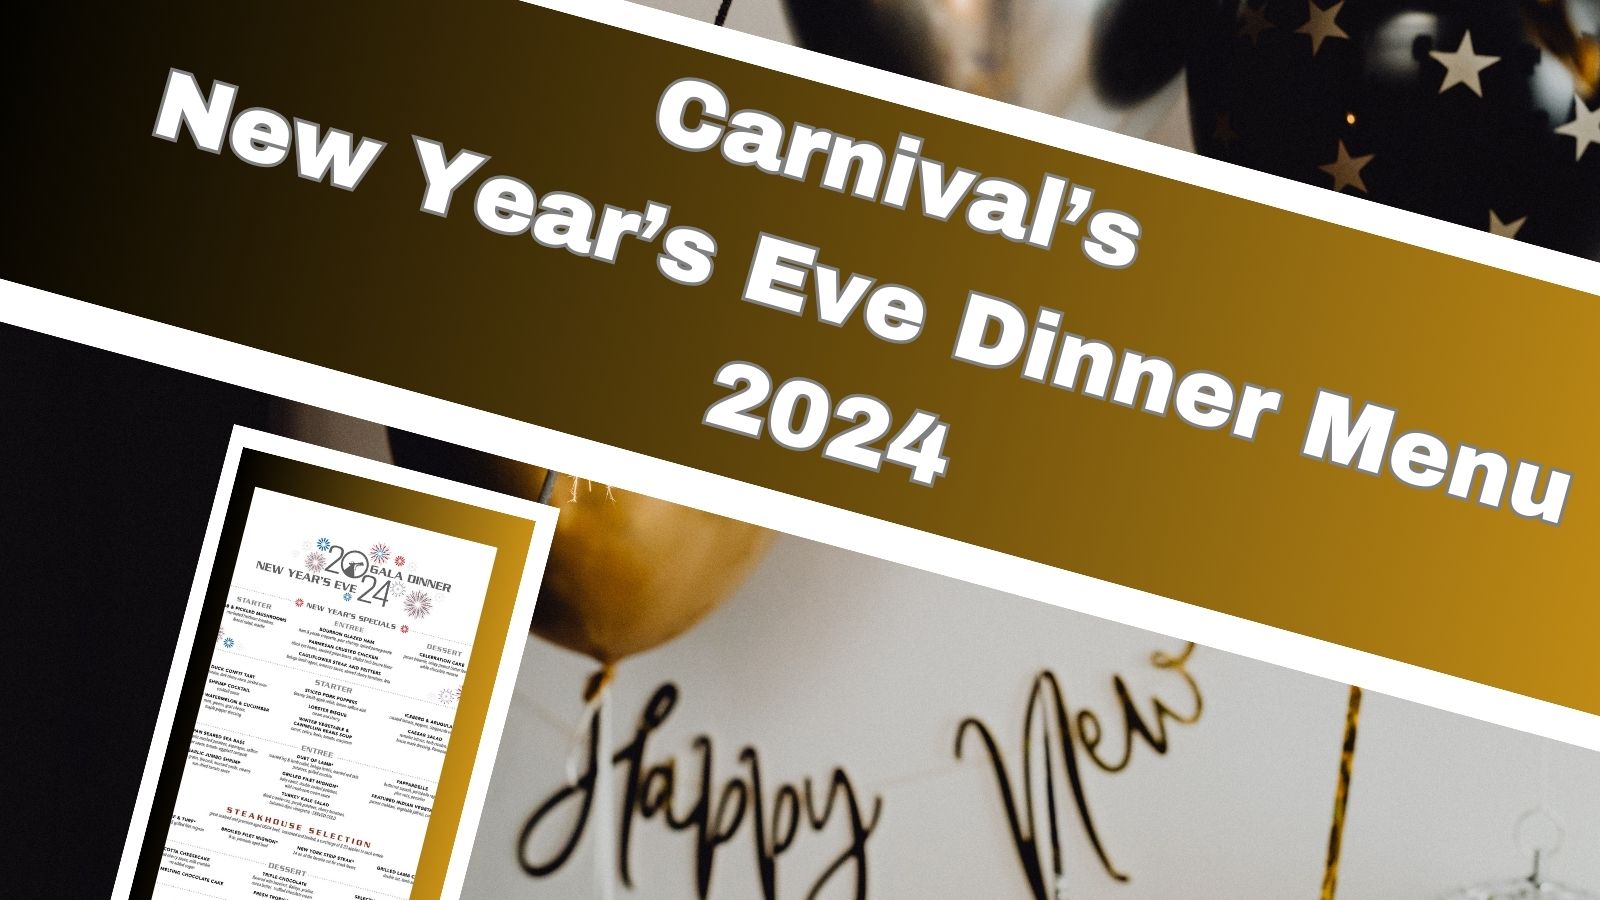 Carnival's New Year's Eve Menu 2024 · Prof. Cruise, Ship Tour, Cruise